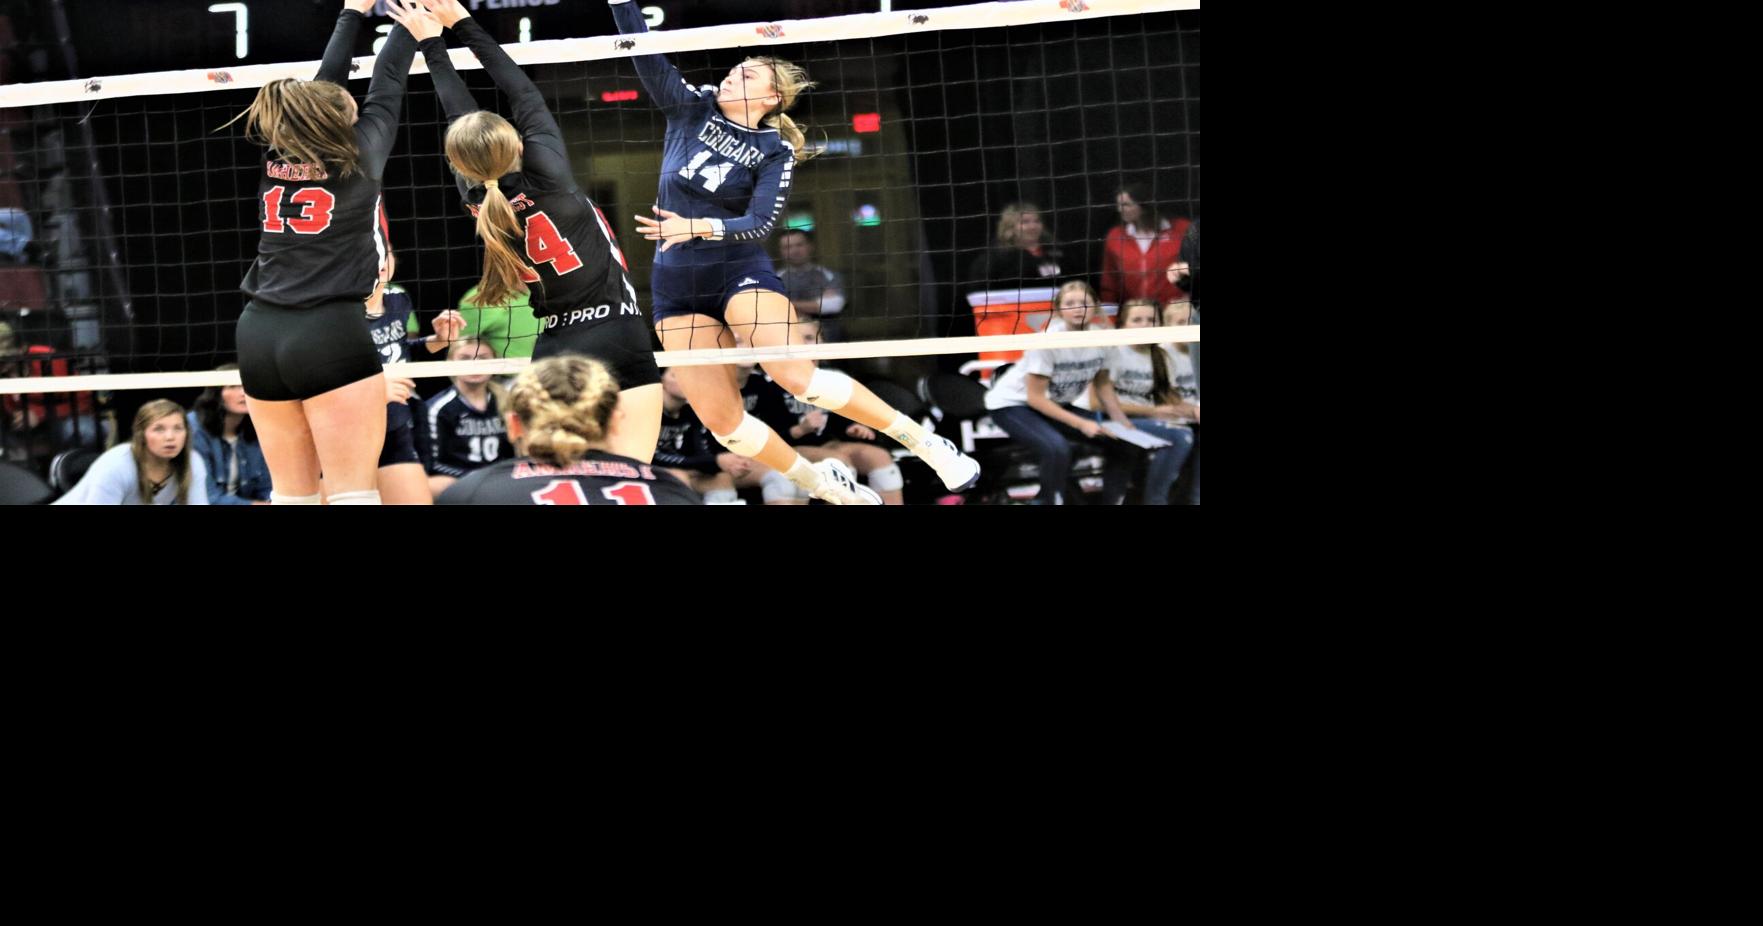 Breaking down the top returning area volleyball players